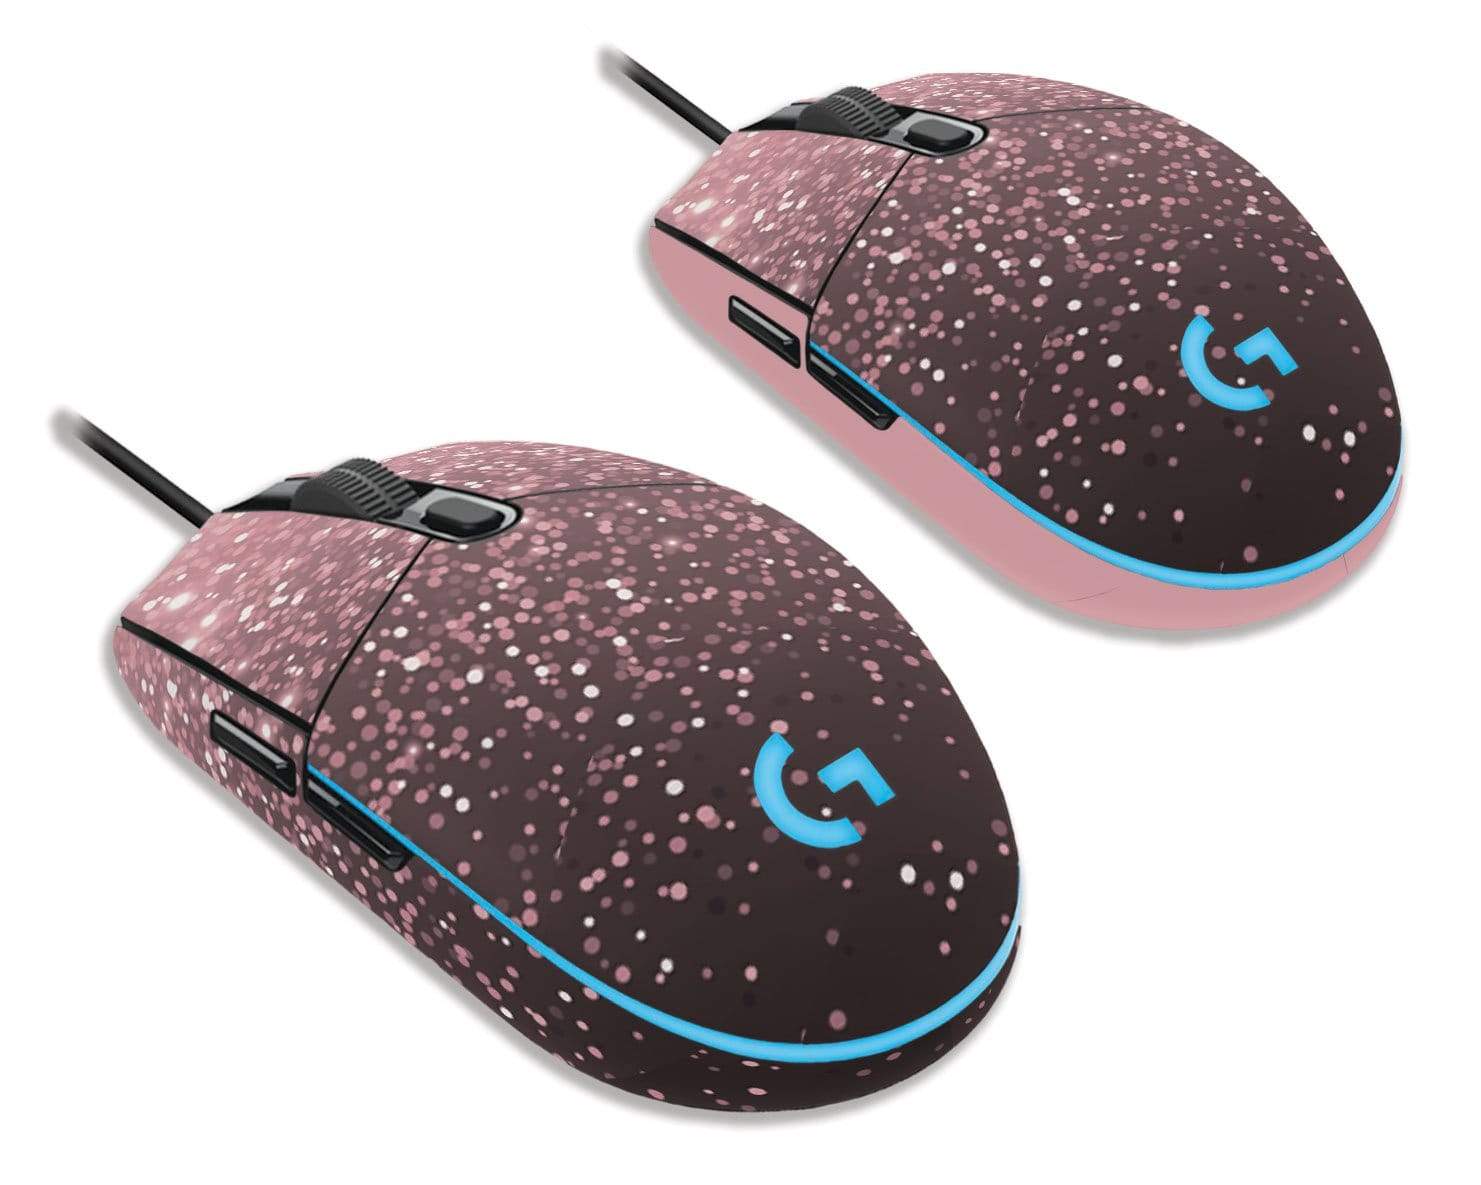 Purple Galaxy Skin for the Logitech G203 Prodigy Gaming Mouse Both Original  and Solid Side Options as Shown Are Included -  Norway